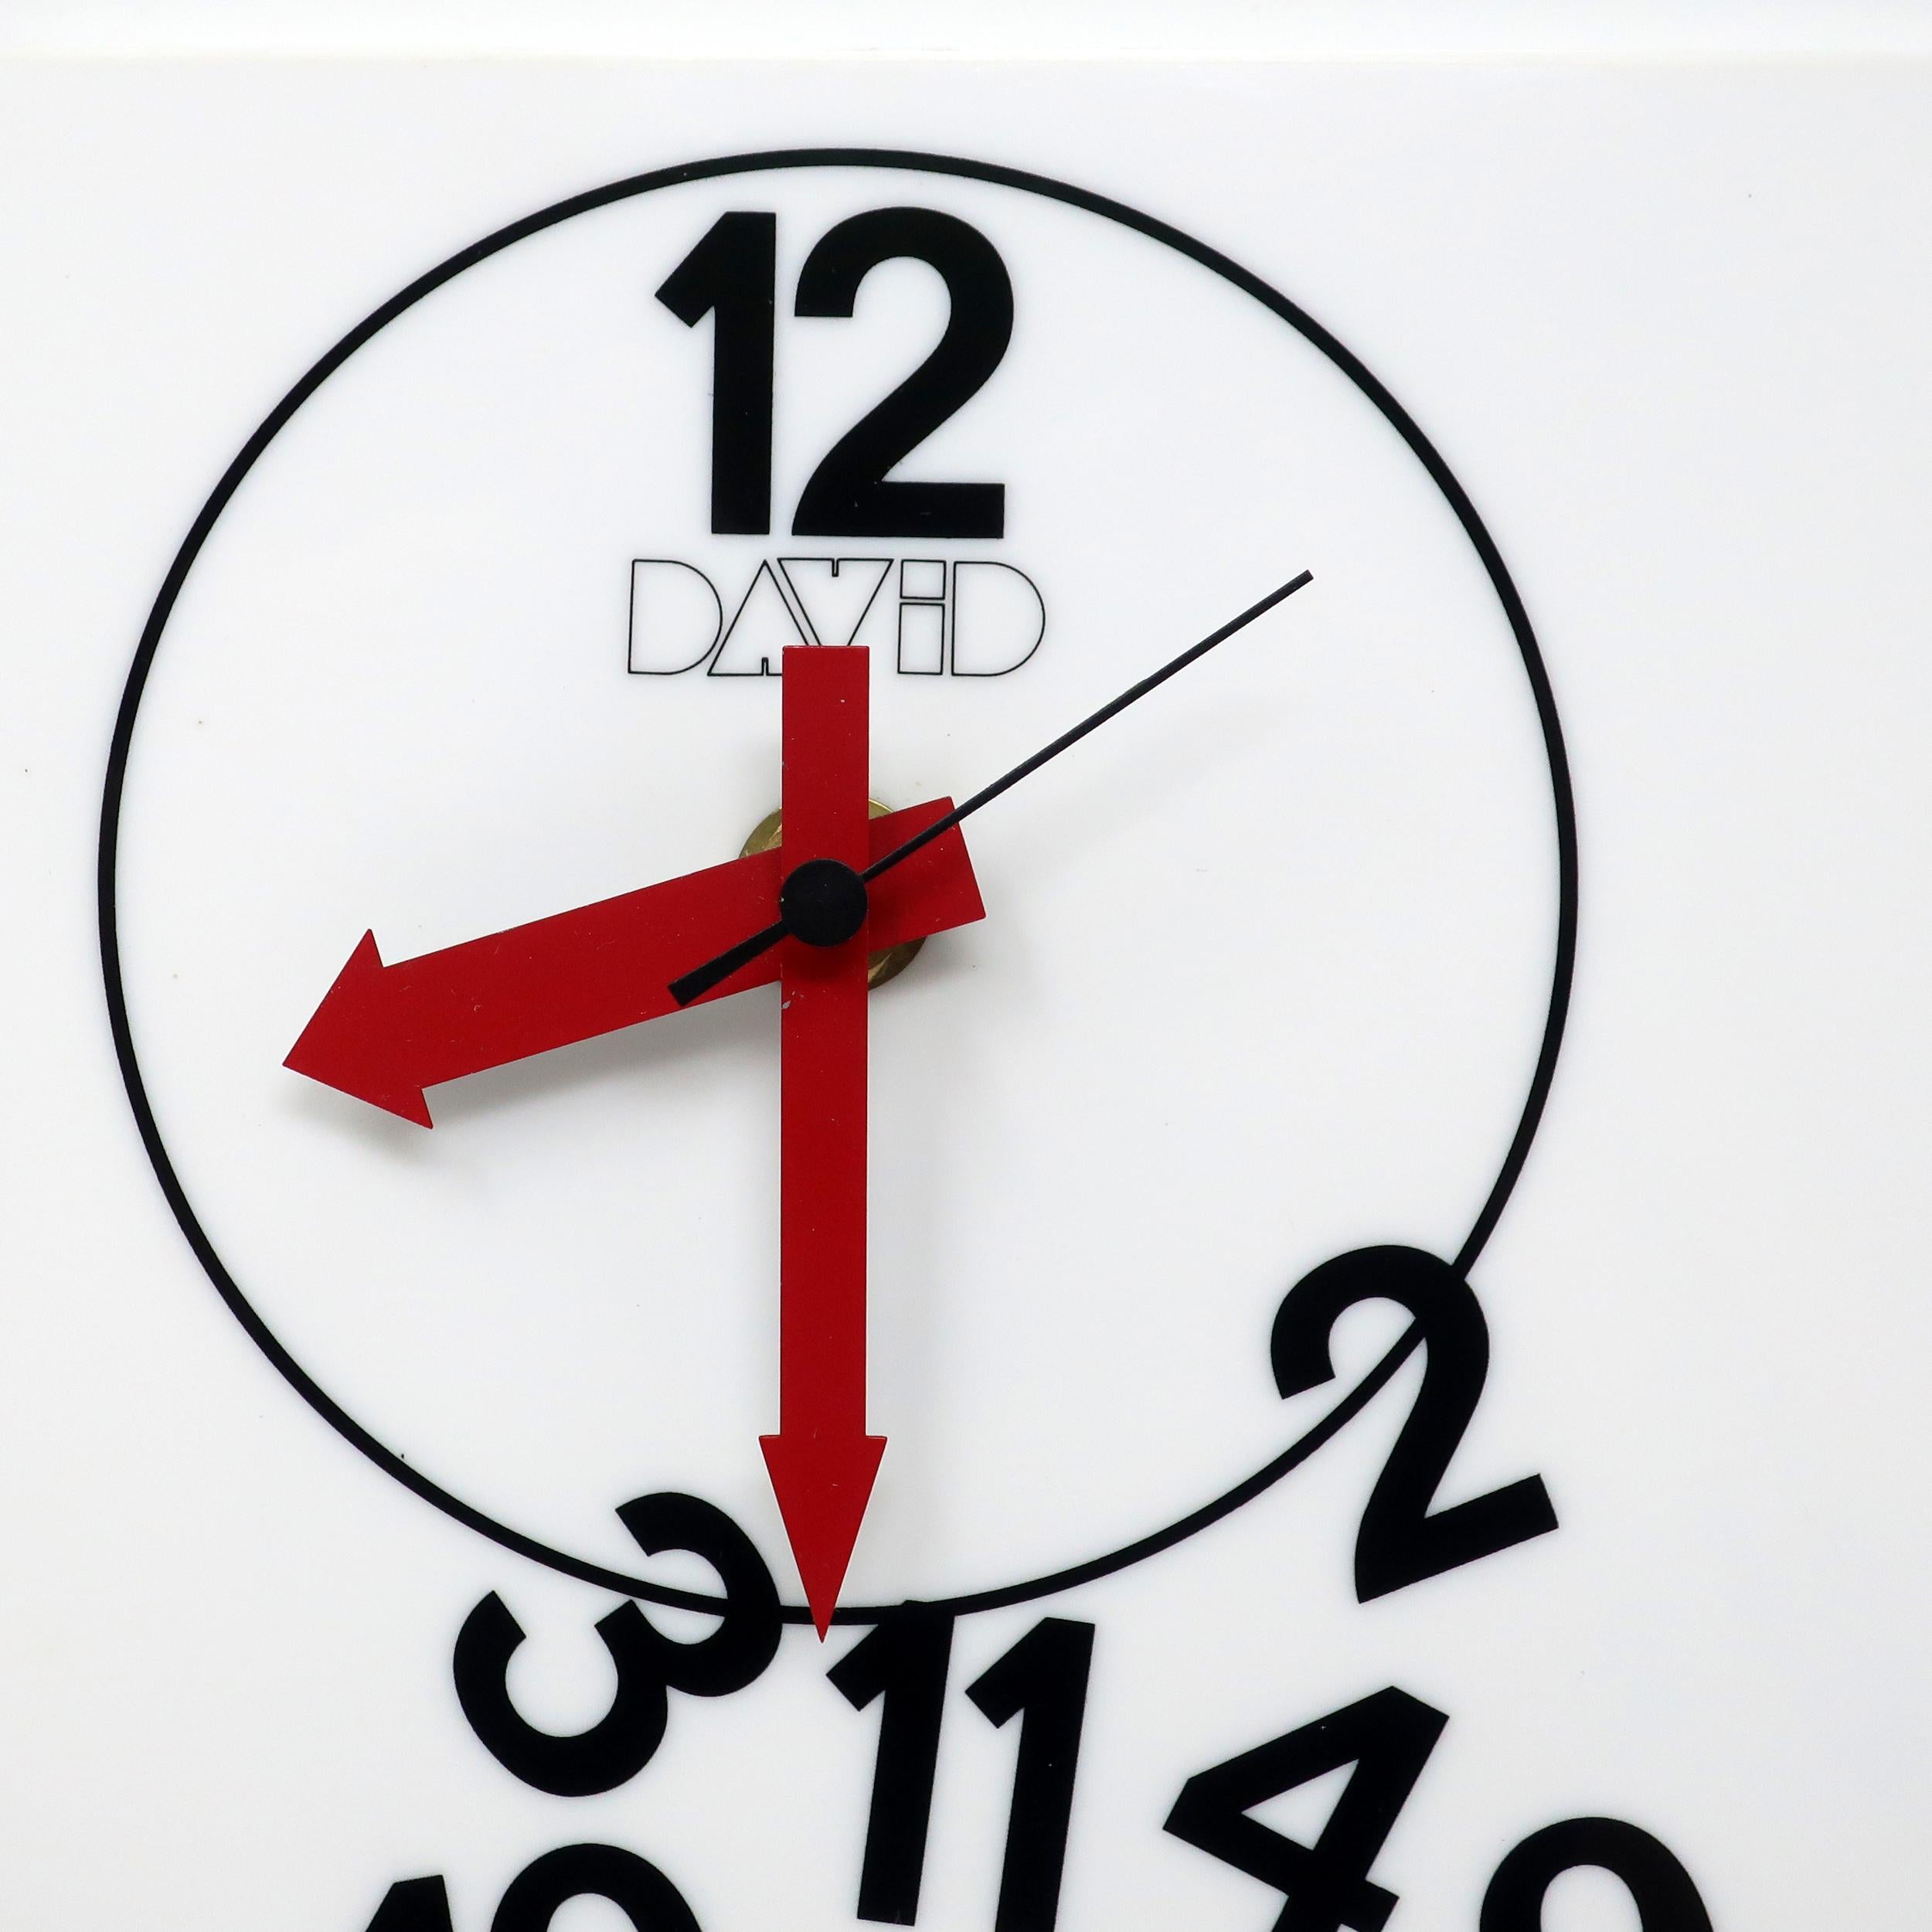 A great 1970s or 1980s wall clock designed by David Davir. A rectangular design with a white lucite face and sides, black lettering and numbers, and red arrow-shaped hands. It has all of the elements of a regular clock but the numbers (except the